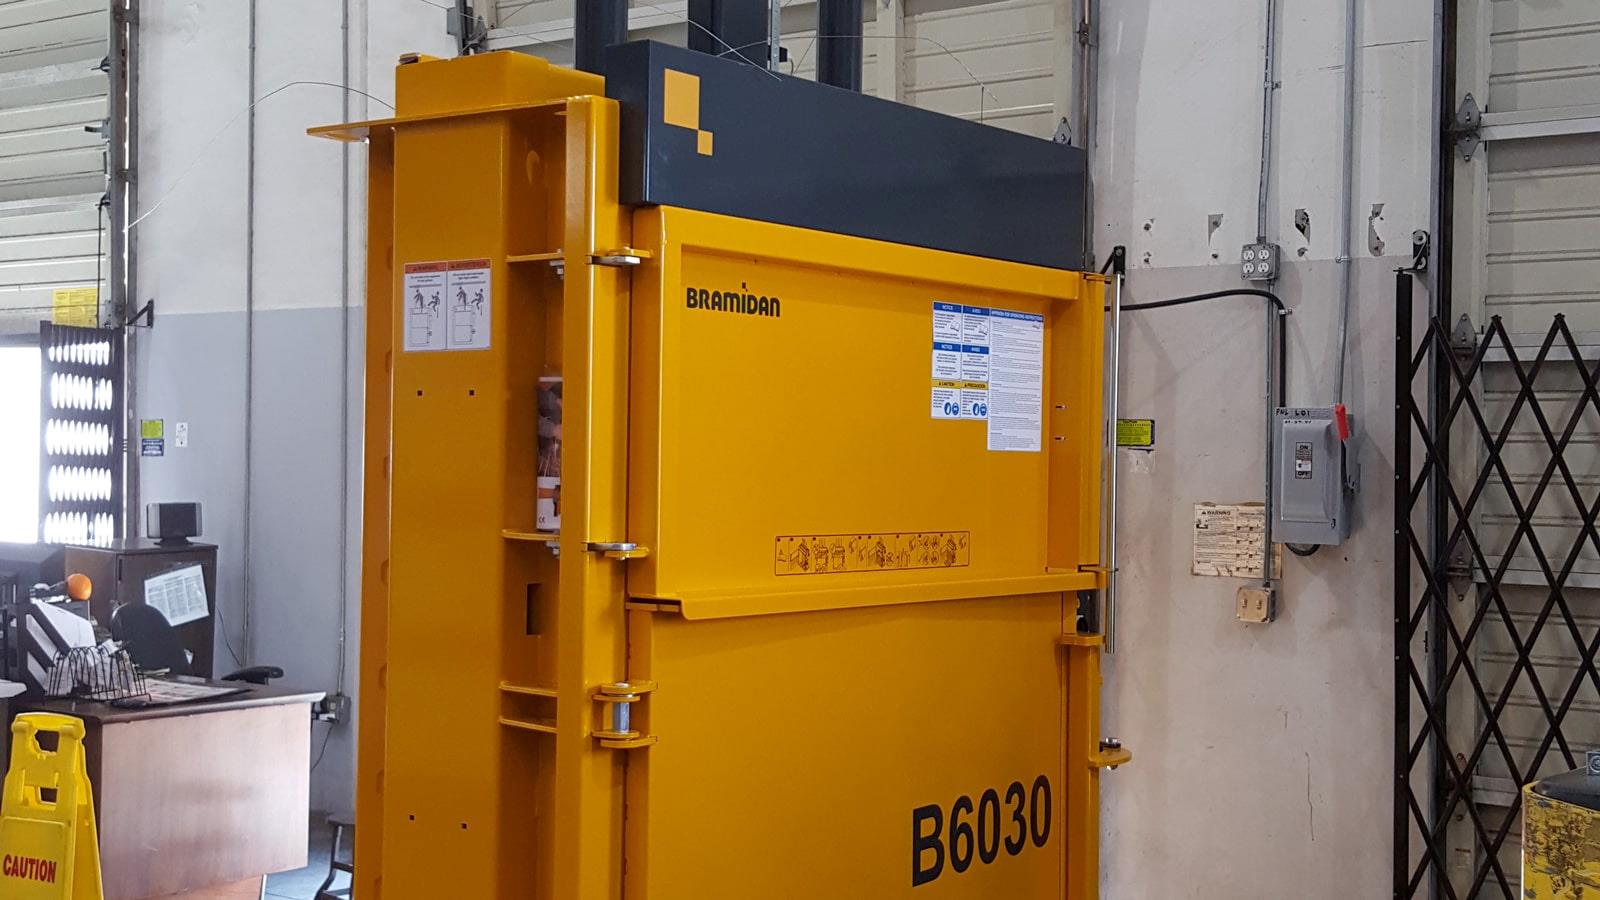 Bramidan B30 Wide baler placed at Citizens of Humanity